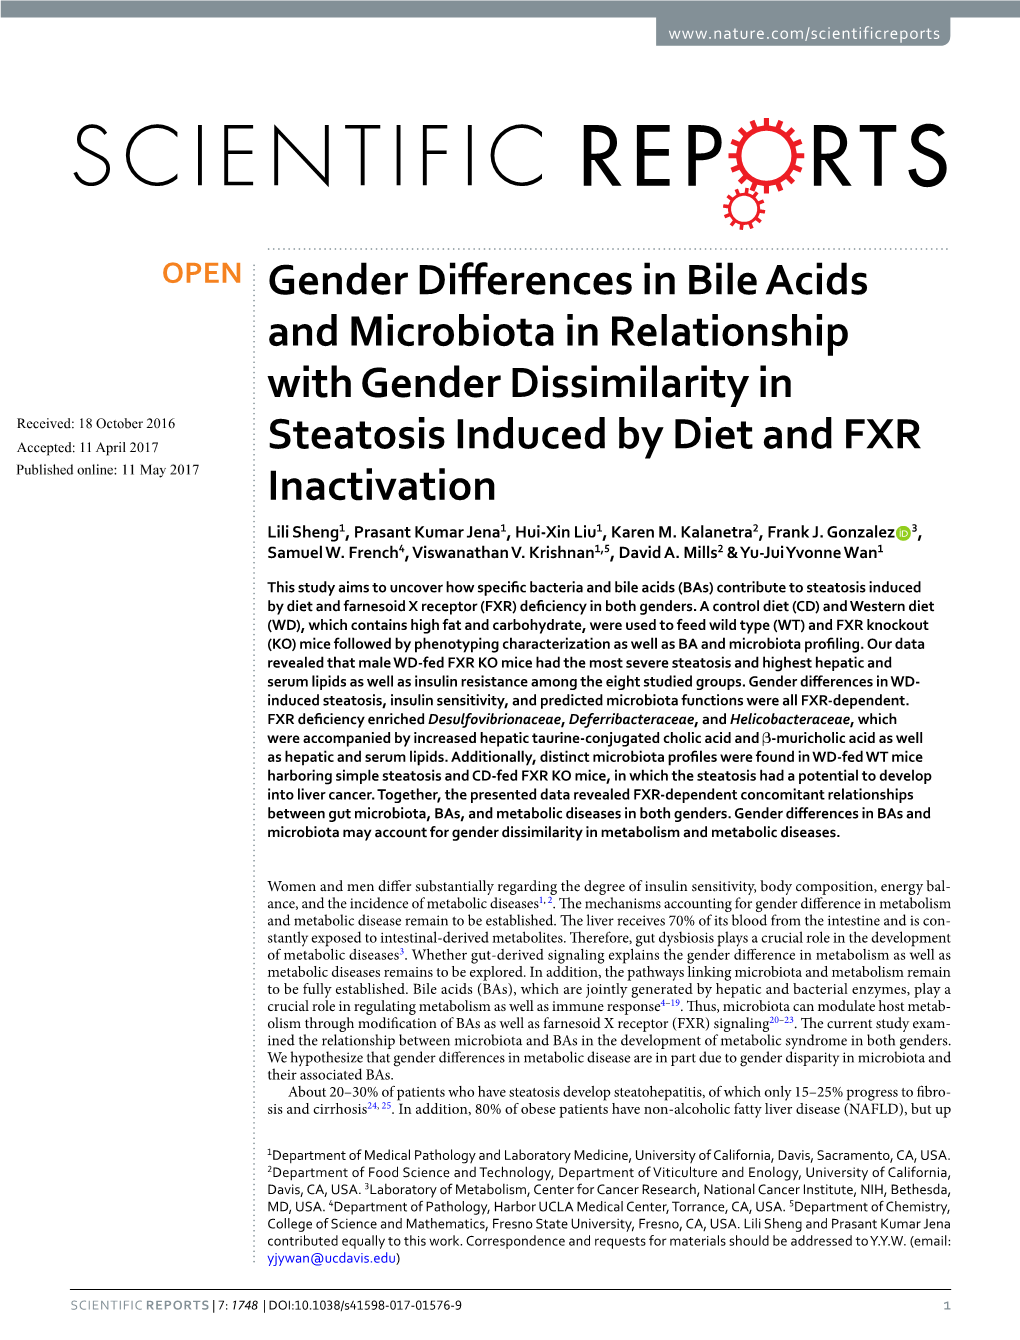 Gender Differences in Bile Acids and Microbiota in Relationship with Gender Dissimilarity in Steatosis Induced by Diet and FXR I